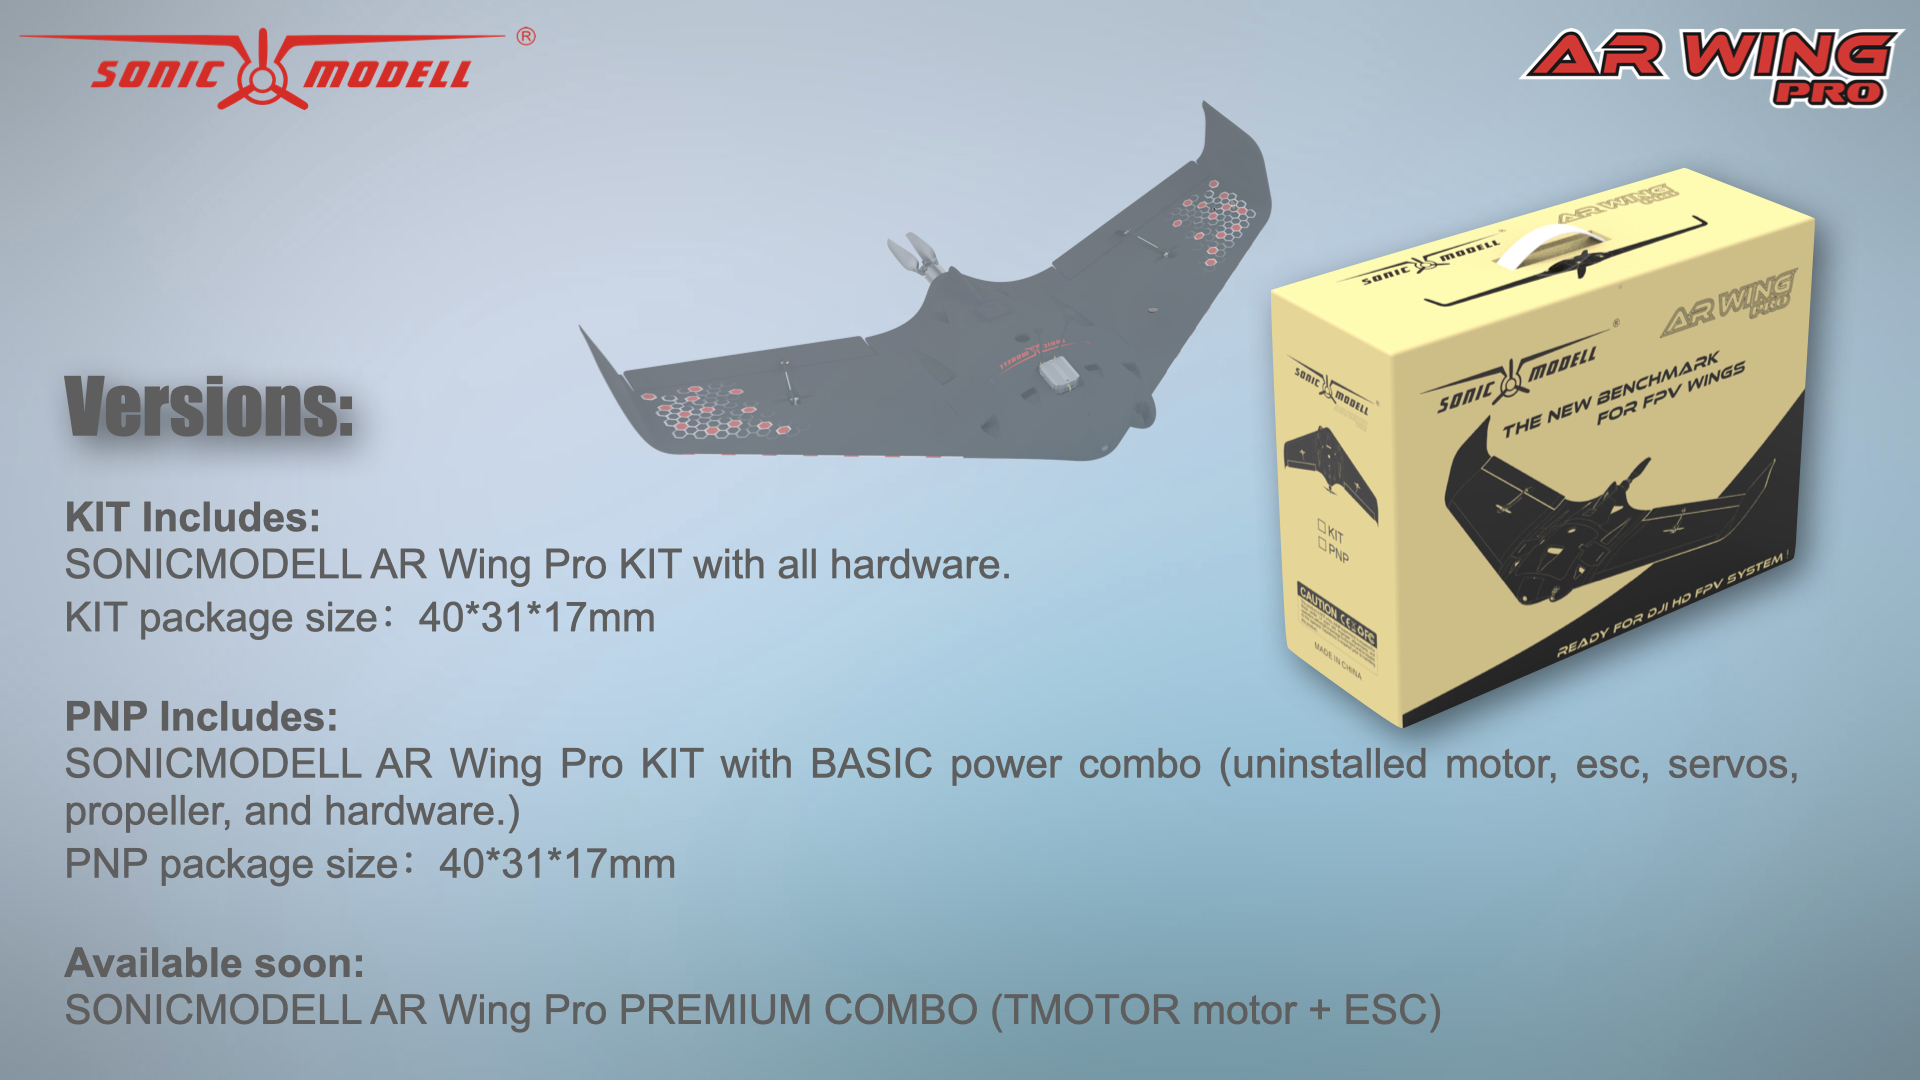 Sonicmodell-AR-Wing-Pro-1000mm-Wingspan-EPP-FPV-Flying-Wing-RC-Airplane-KITPNP-1756841-6